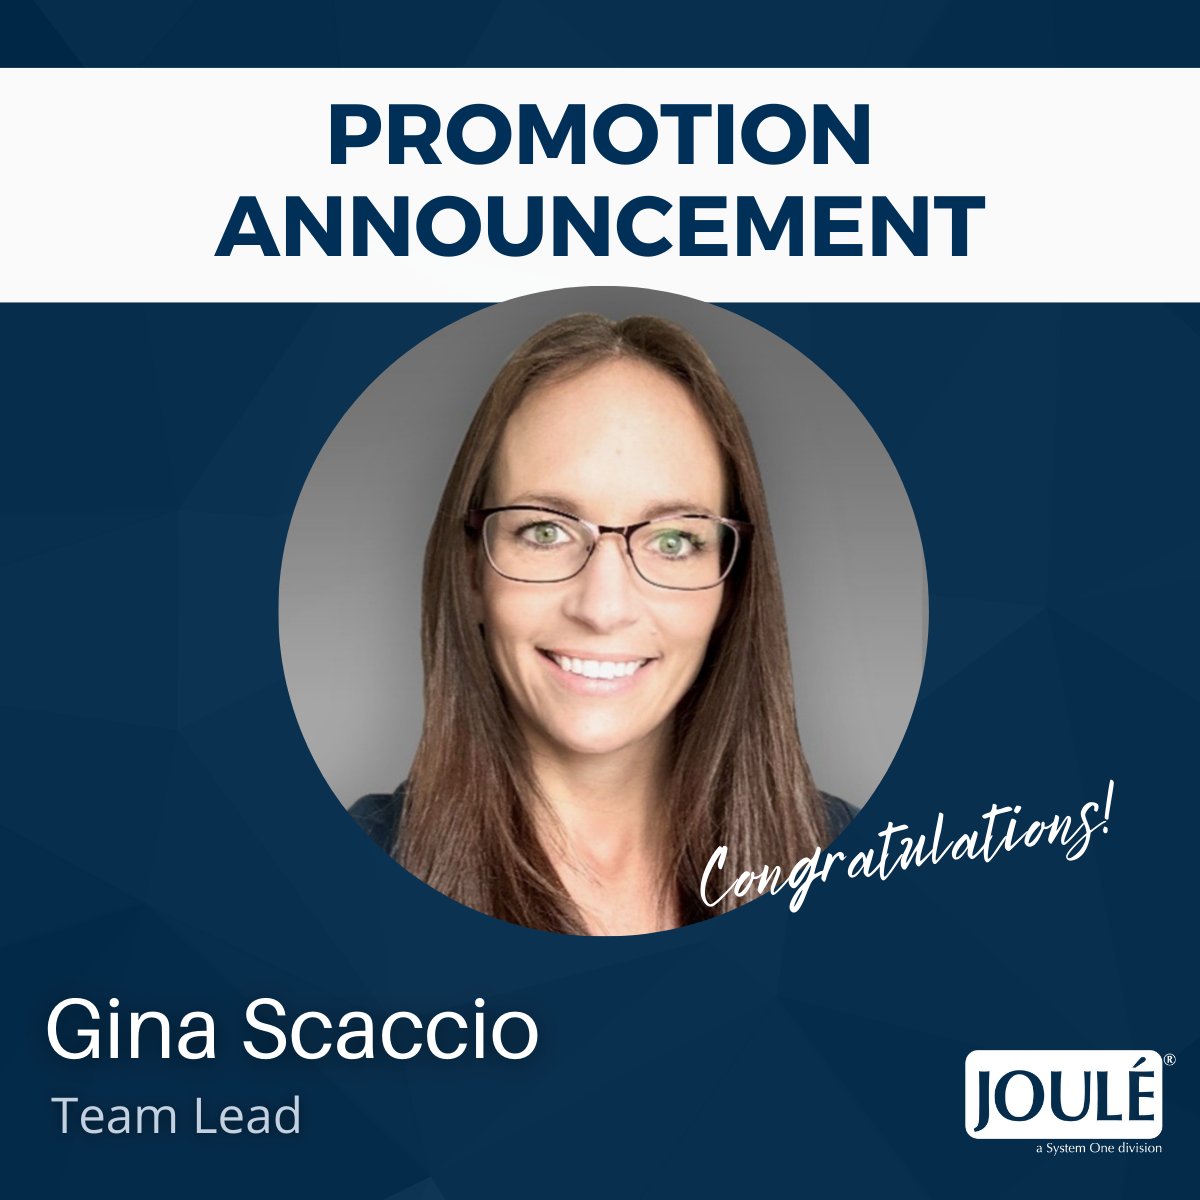 We are excited to announce the promotion of Gina Scaccio to Team Lead! 

Favorite quote: “Love many, trust few, and always paddle your own canoe.” 

#promotionalert #promotionannouncement #congratulations #promotion #teamplayer